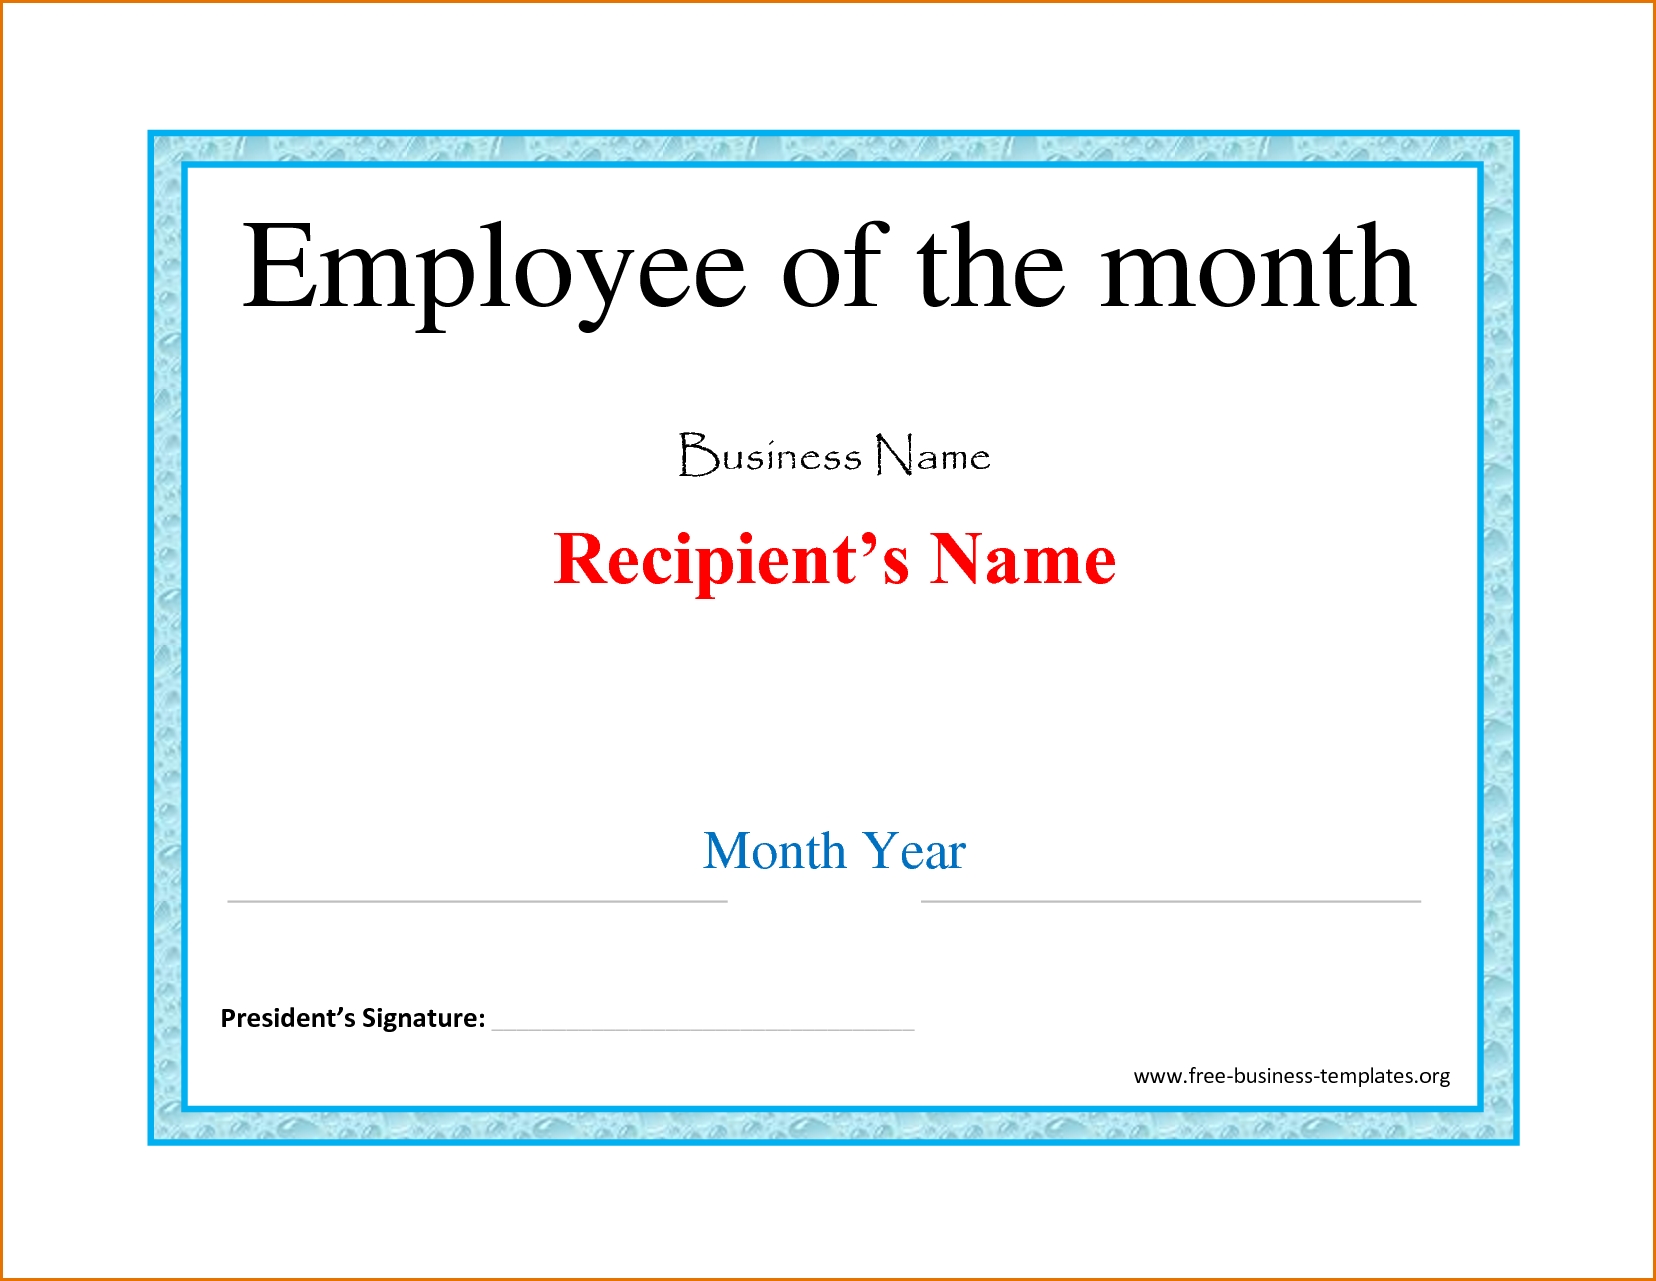 10 Awesome Employee Of The Month Ideas ideas of employee of the month printable certificate with additional 2022